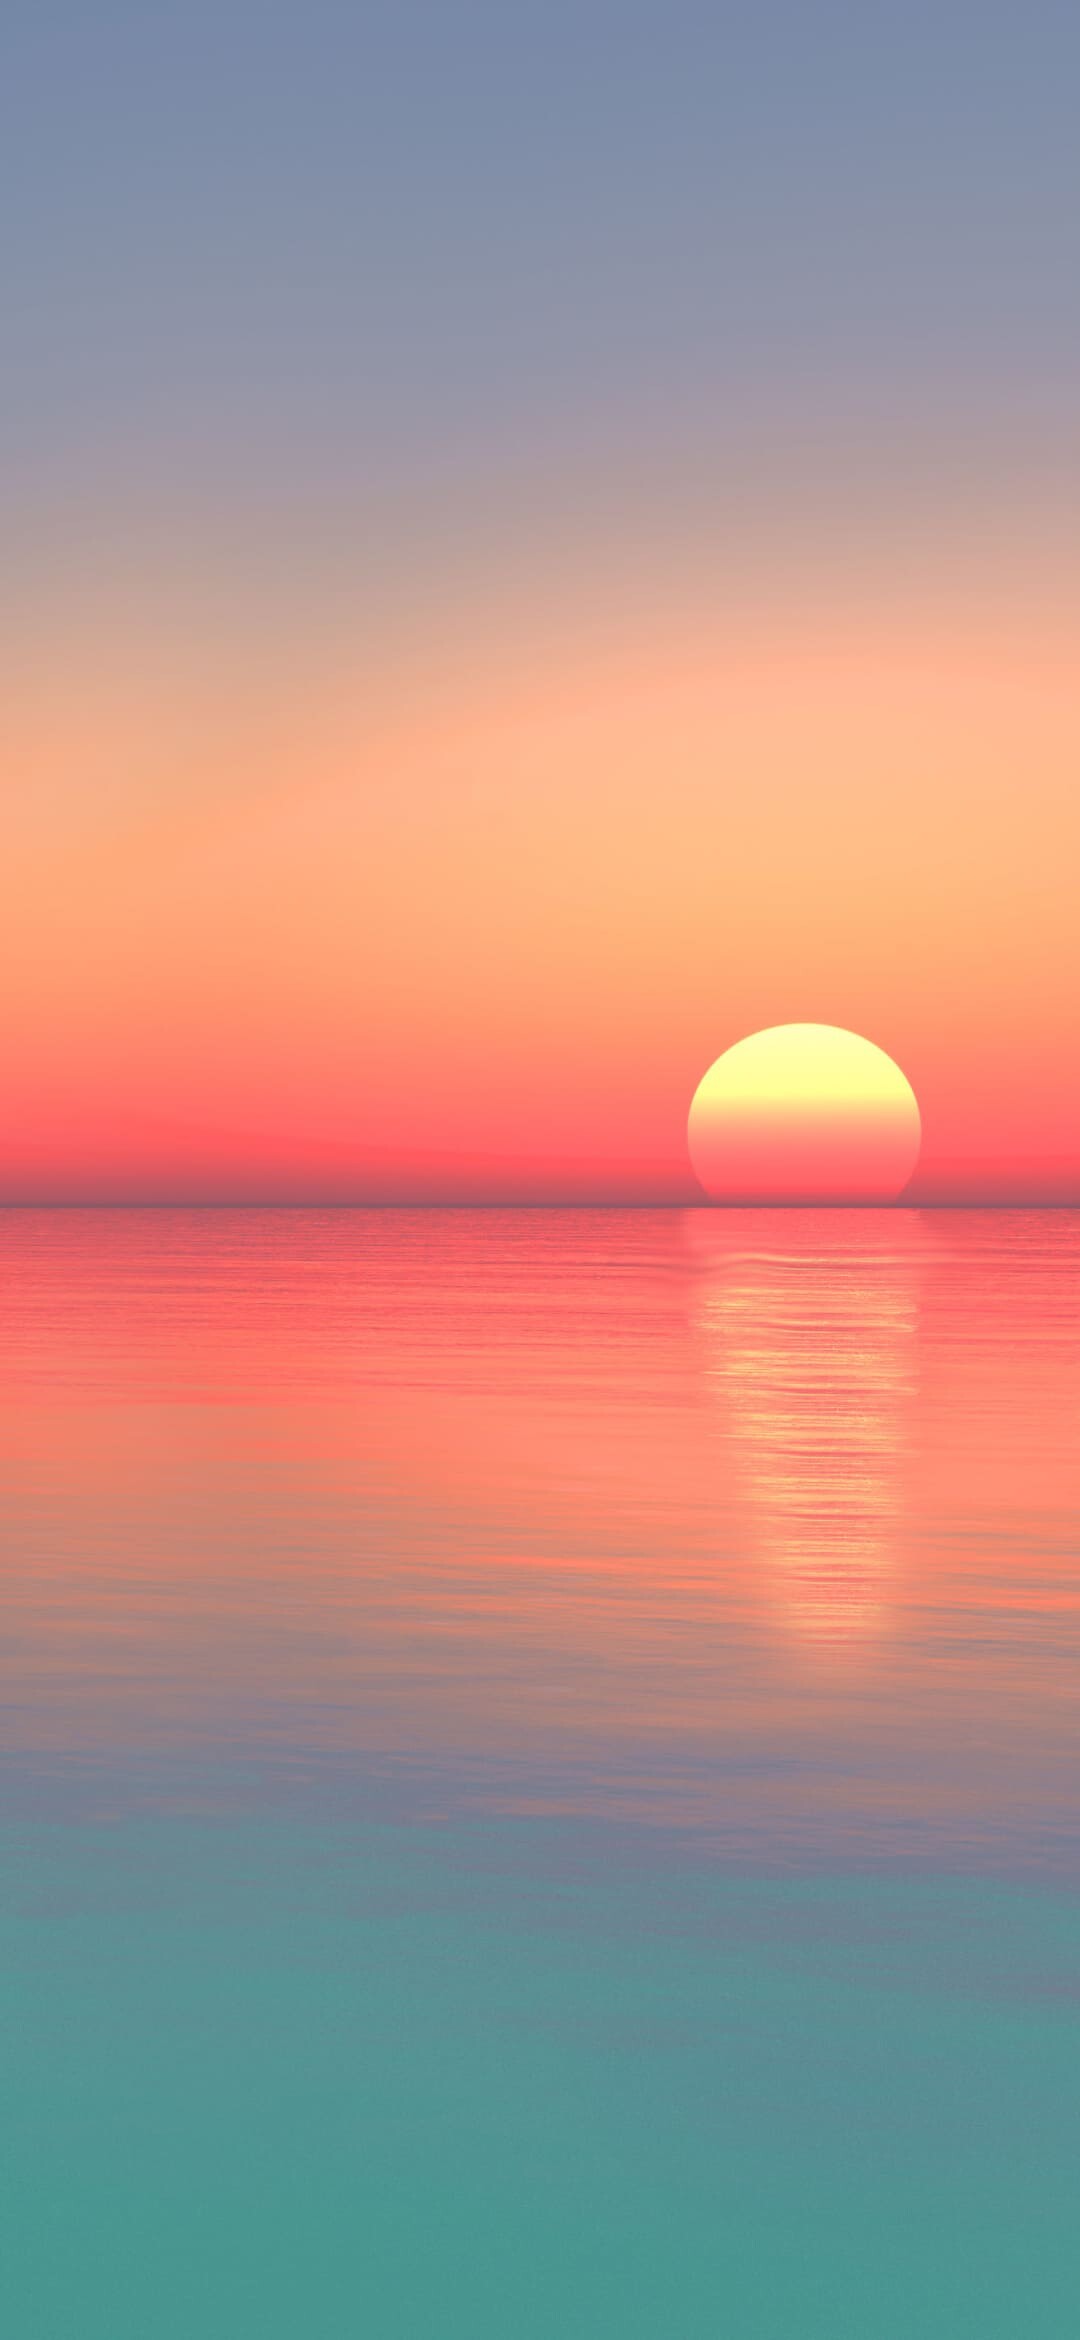 Sunset: The sun is low on the horizon, Celestial object, Orange-reddish color skies. 1080x2340 HD Background.